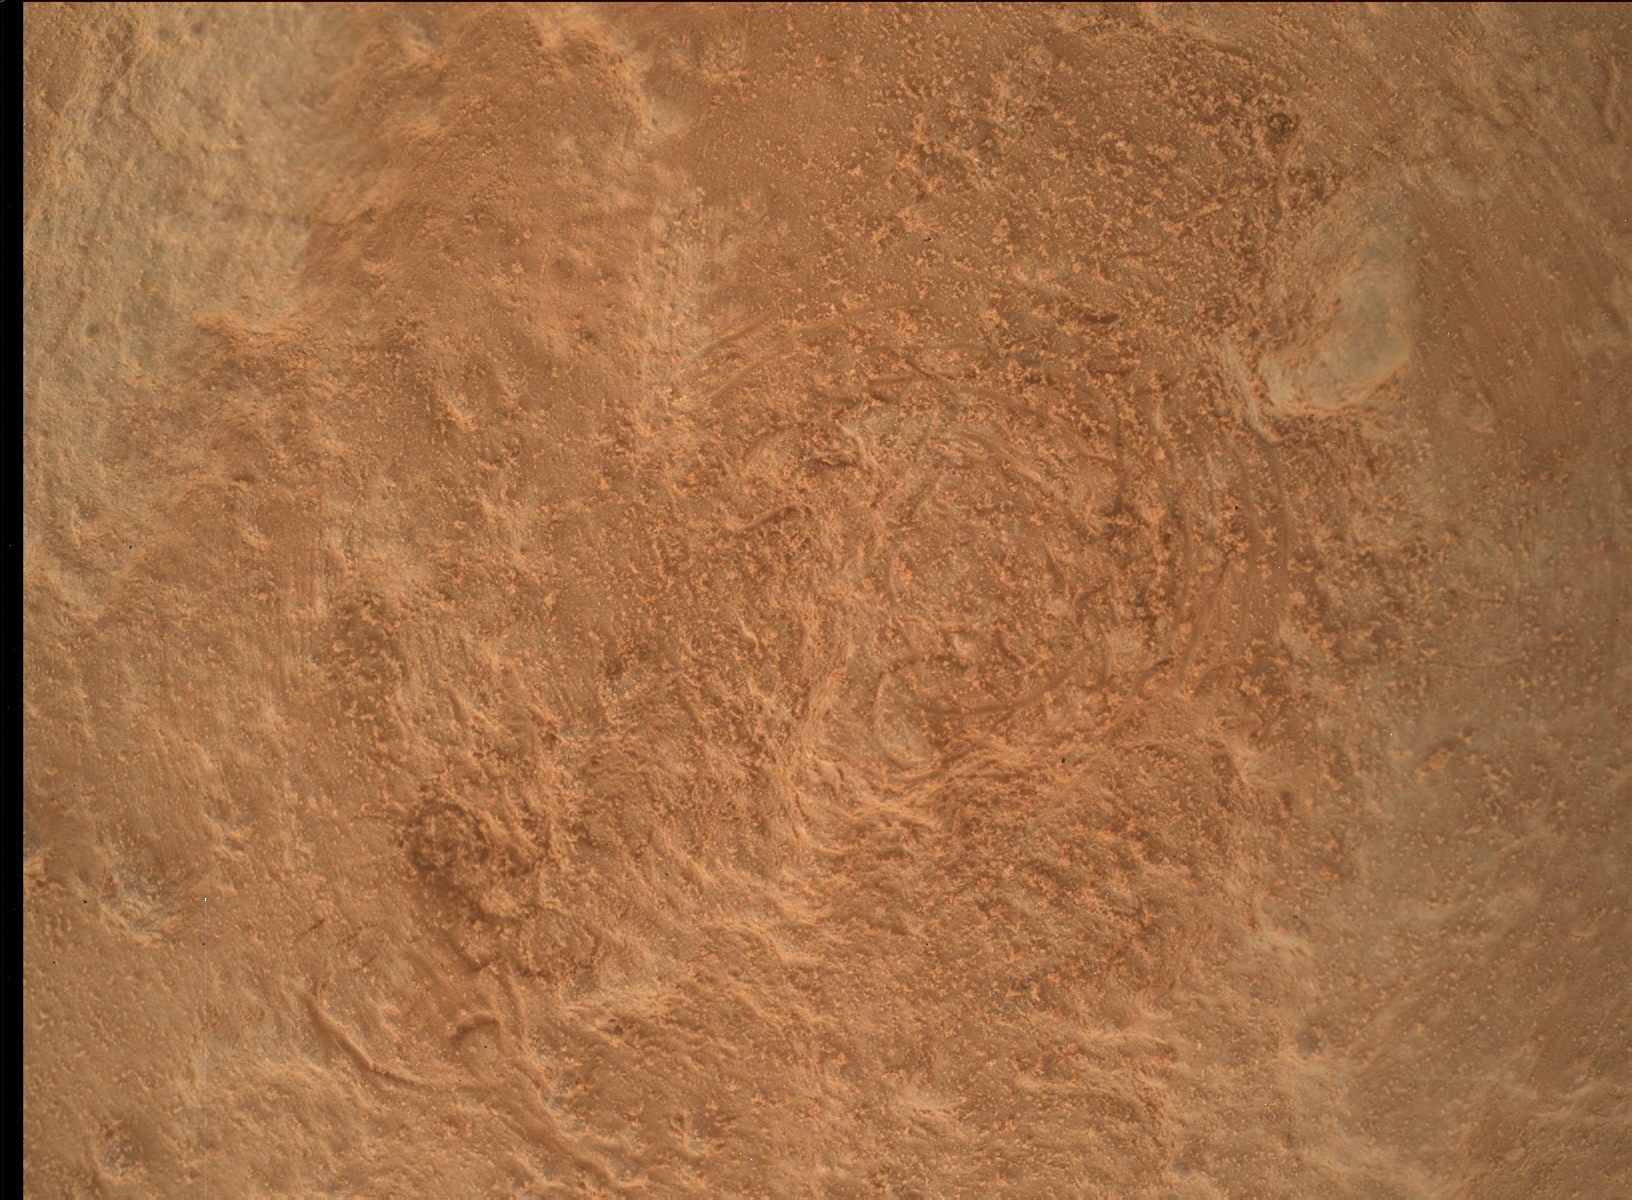 Nasa's Mars rover Curiosity acquired this image using its Mars Hand Lens Imager (MAHLI) on Sol 3167